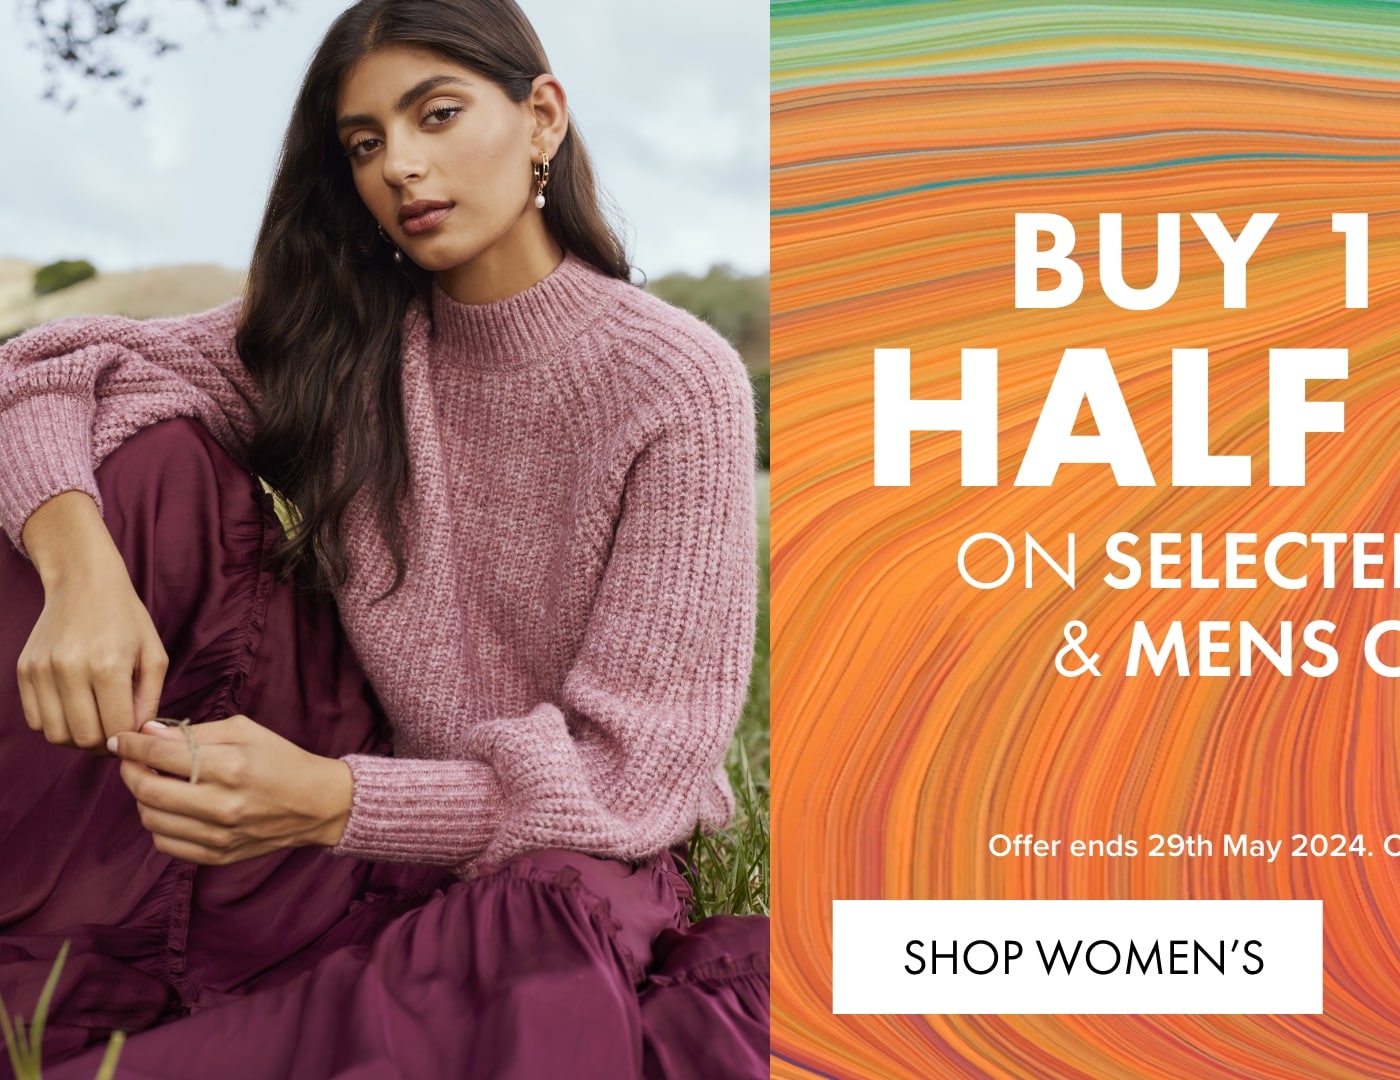 BUY 1 GET 1 HALF PRICE on Selected Women’s Clothing